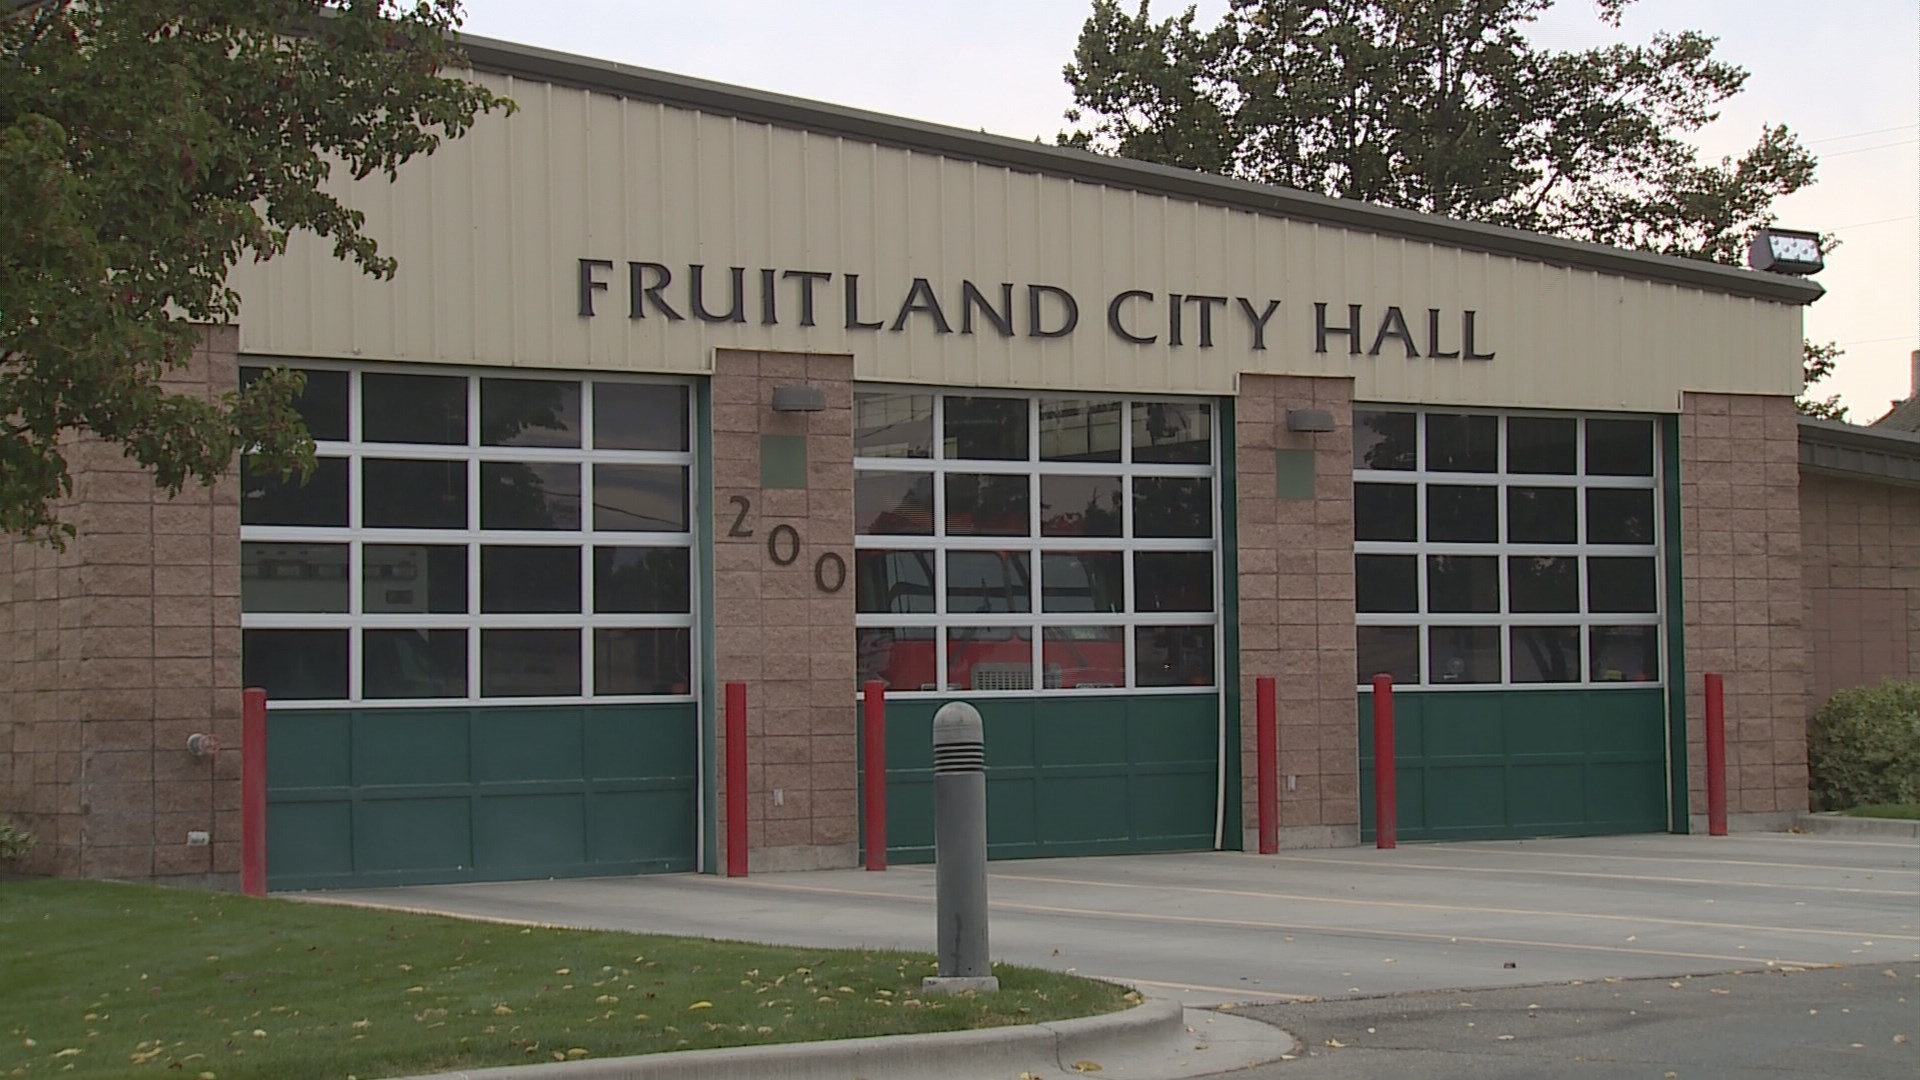 Mayor Brian Howell was absent at the April 8 city council meeting, where Fruitland's city attorney made the resignation announcement for him, citing "health issues."